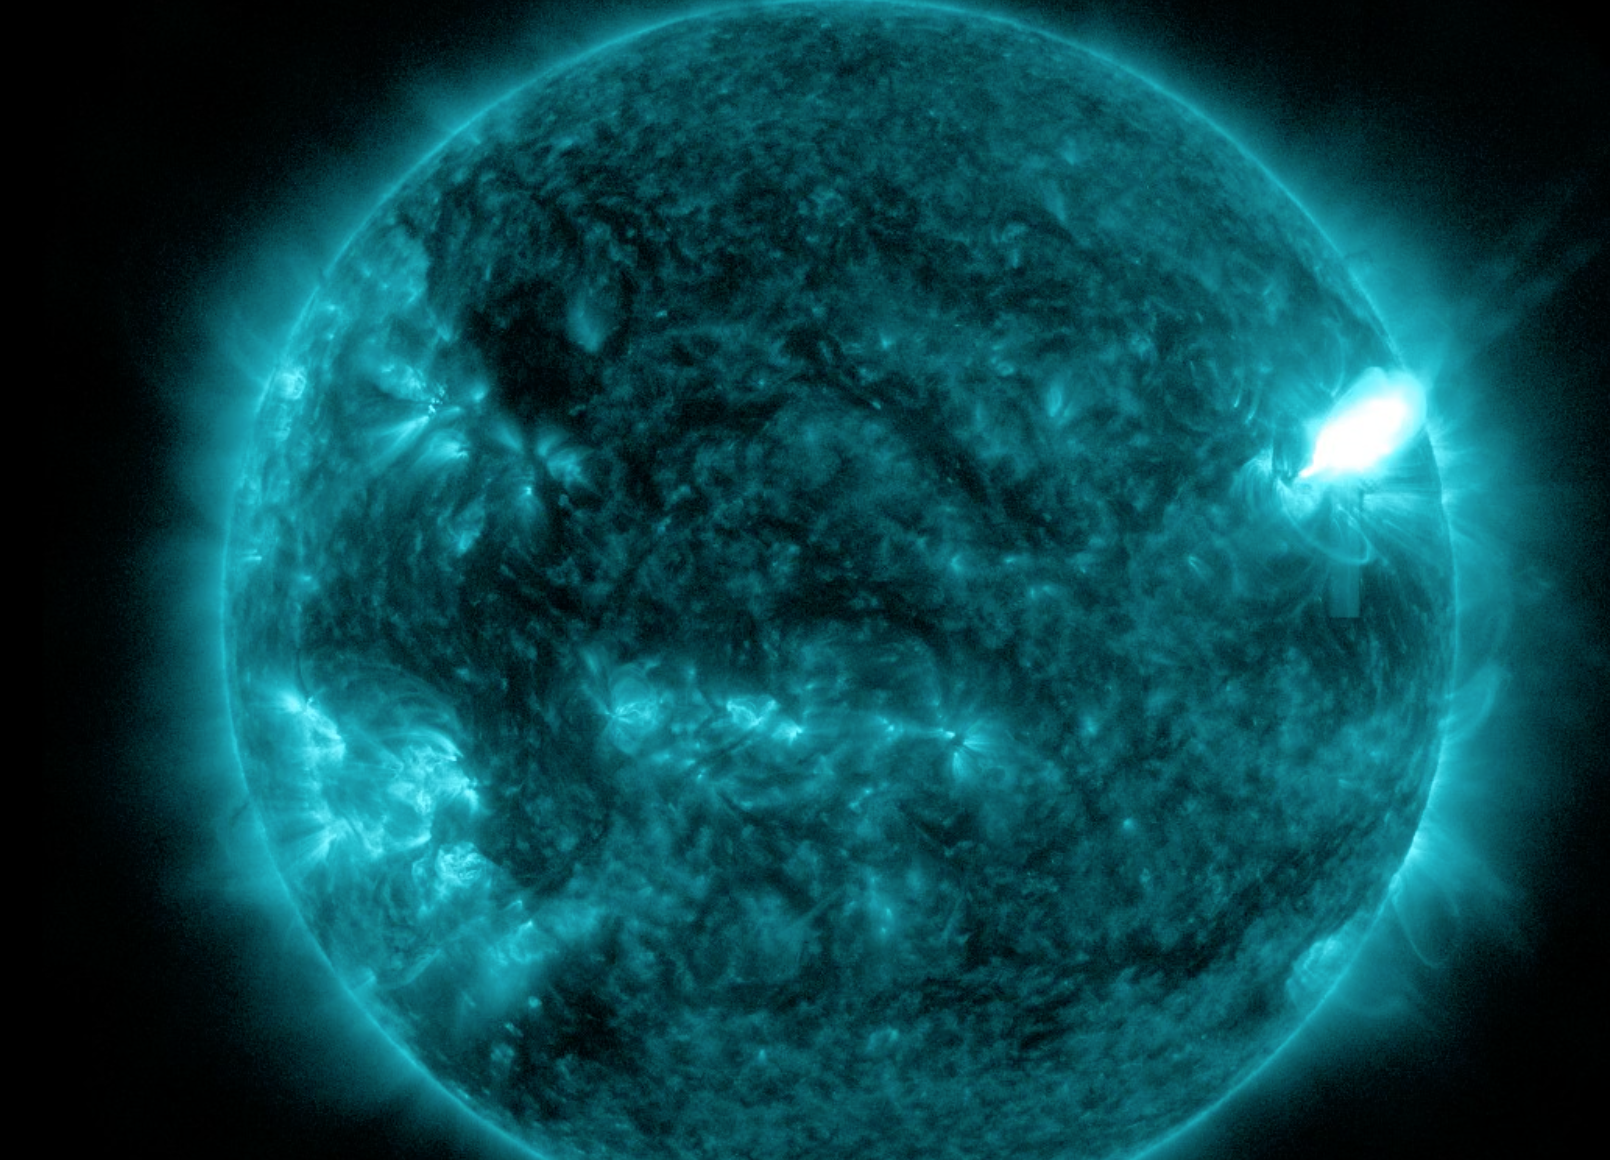 Rare X-class solar flare wipes out radio signals in U.S.